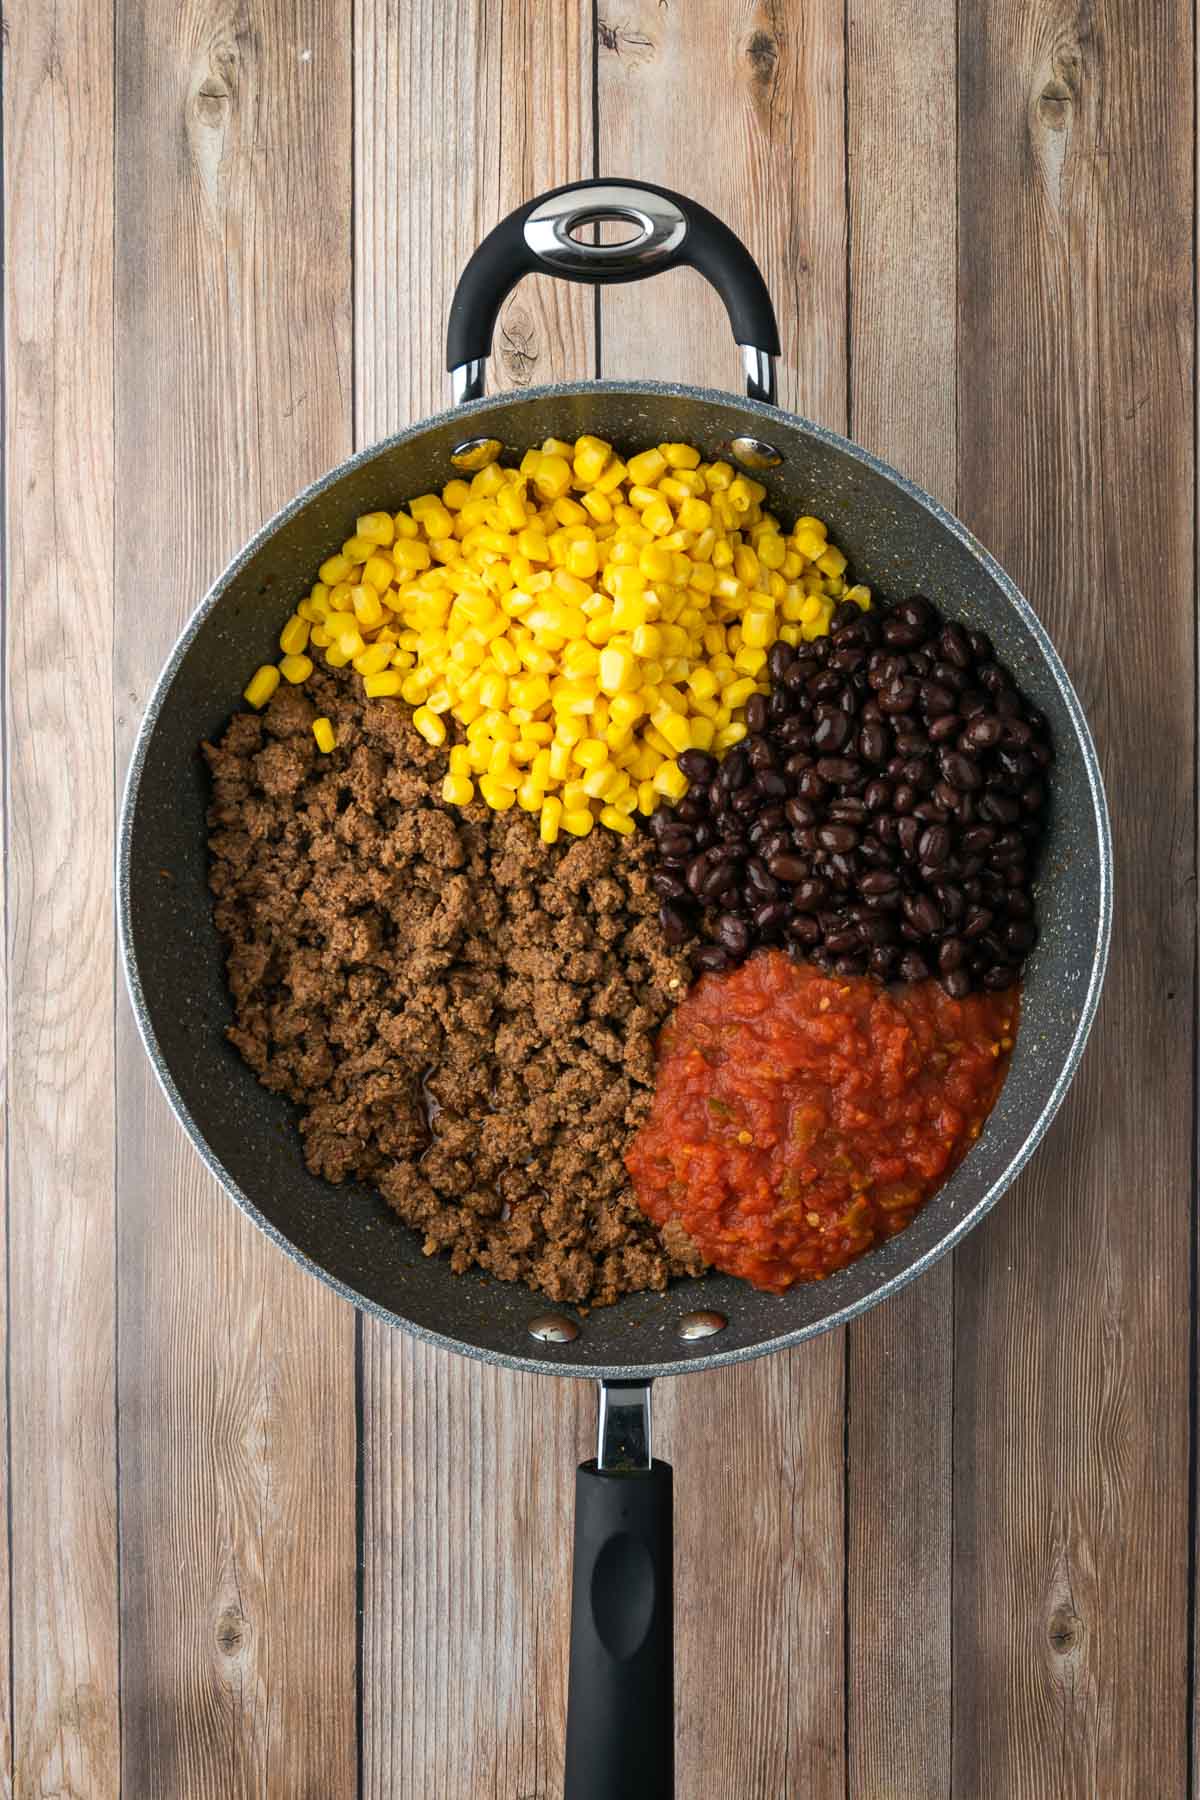 Skillet filled with cooked ground beef, corn, black beans, and salsa.